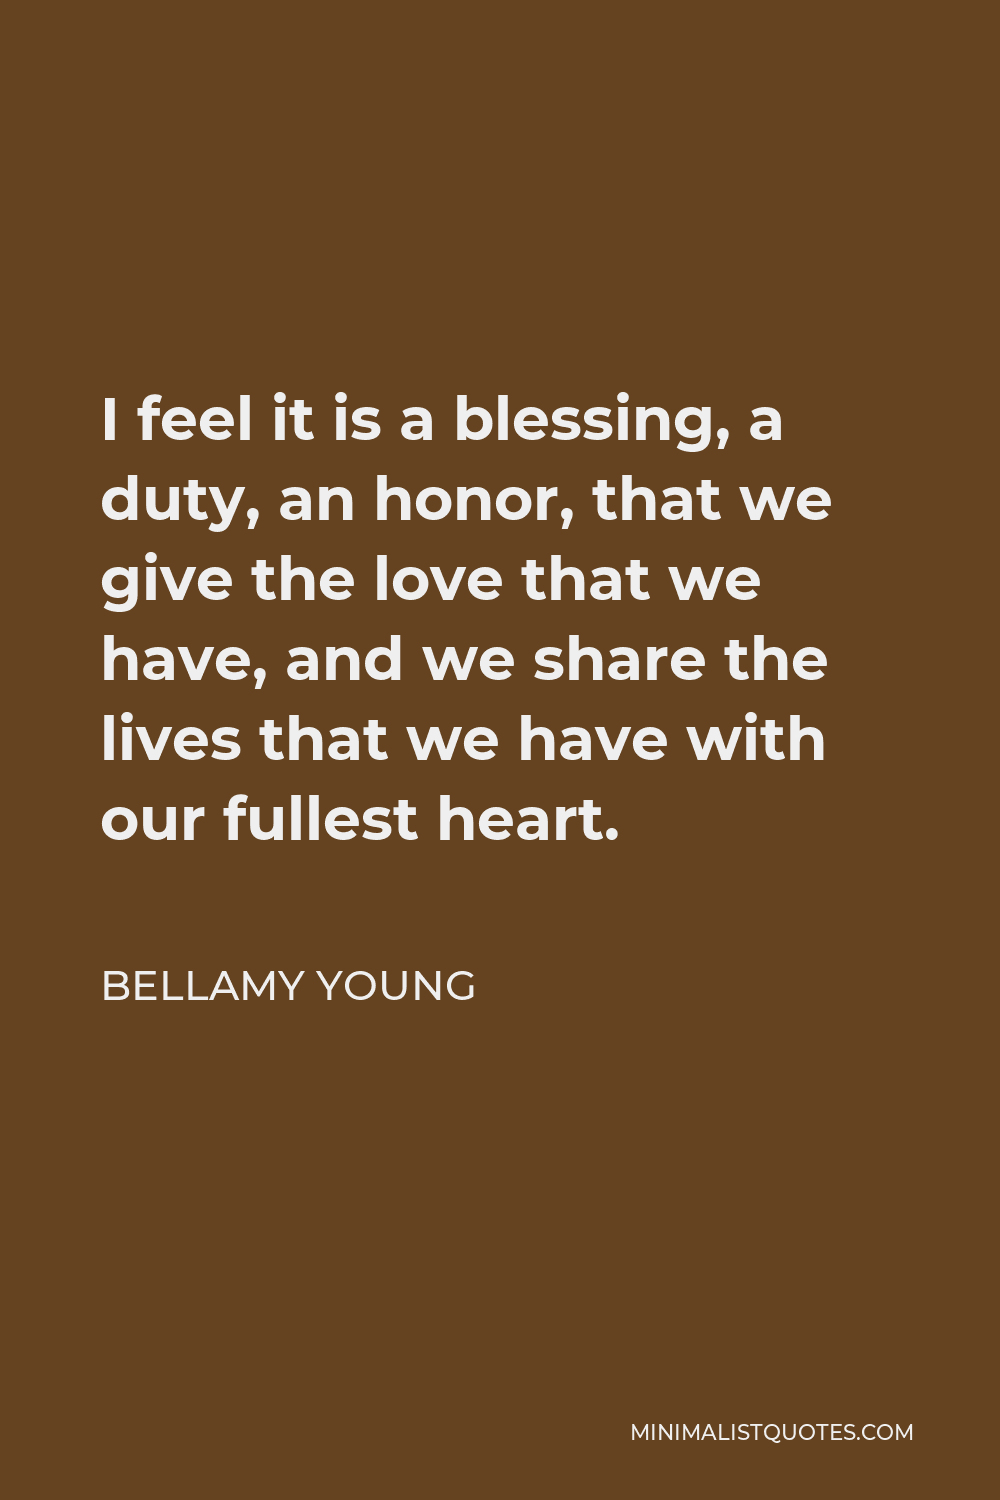 Bellamy Young Quote - I feel it is a blessing, a duty, an honor, that we give the love that we have, and we share the lives that we have with our fullest heart.